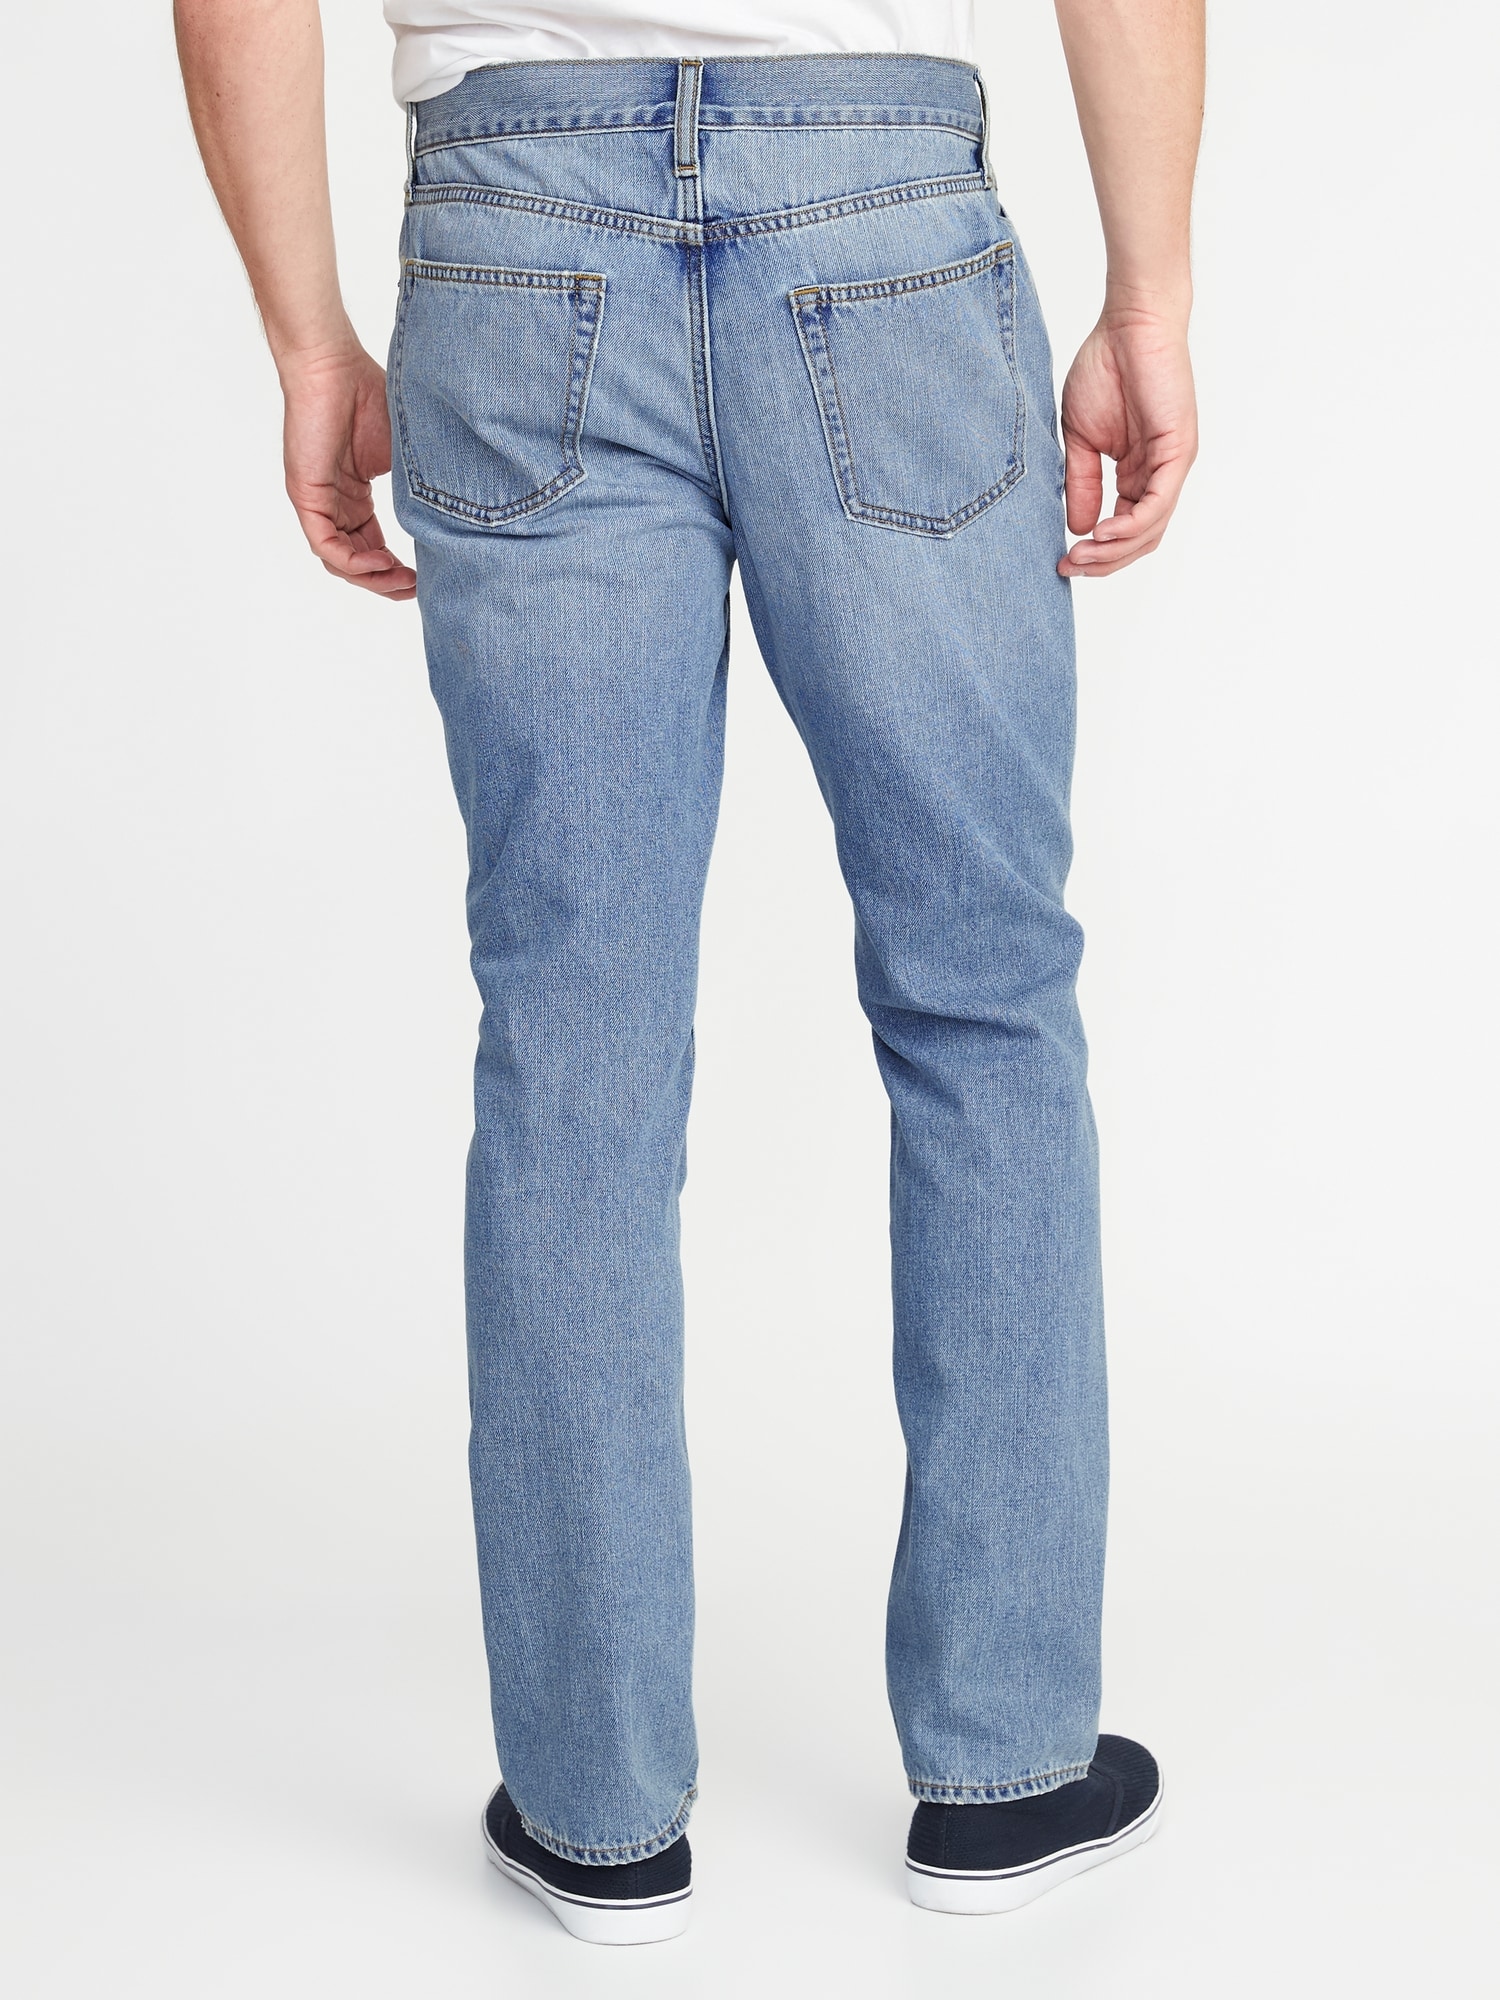 old navy mens jeans